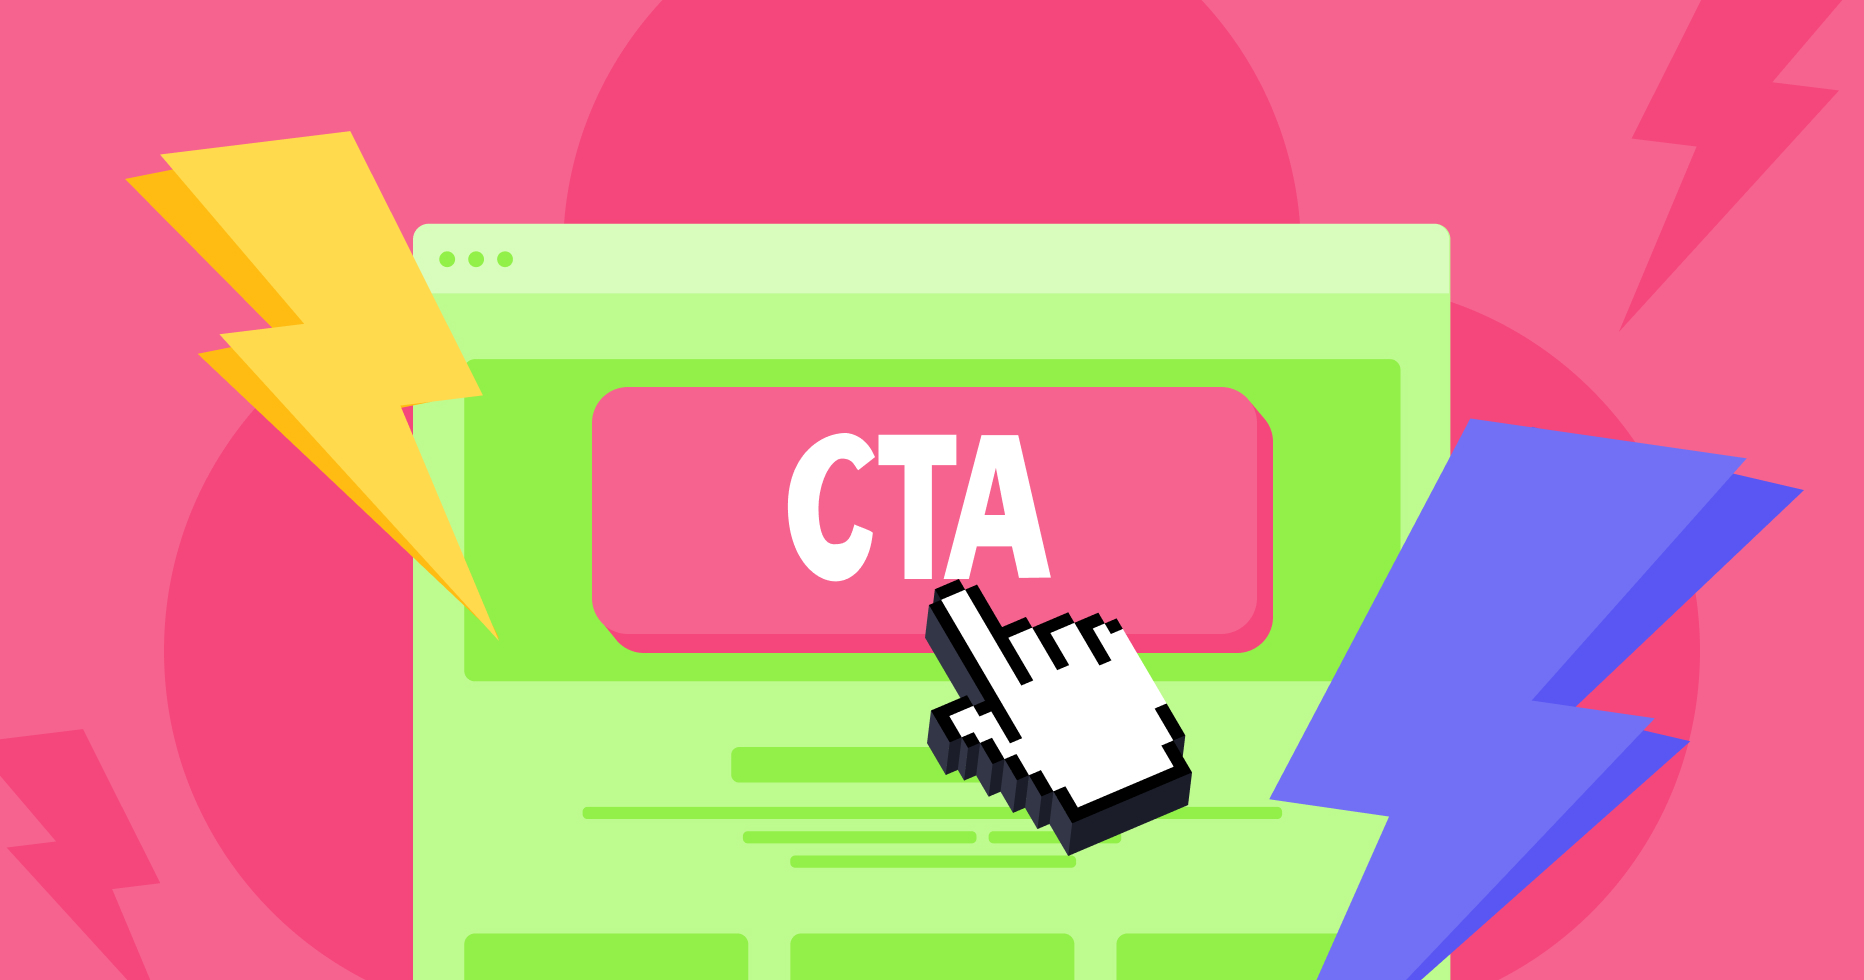 CTA examples for a travel blog